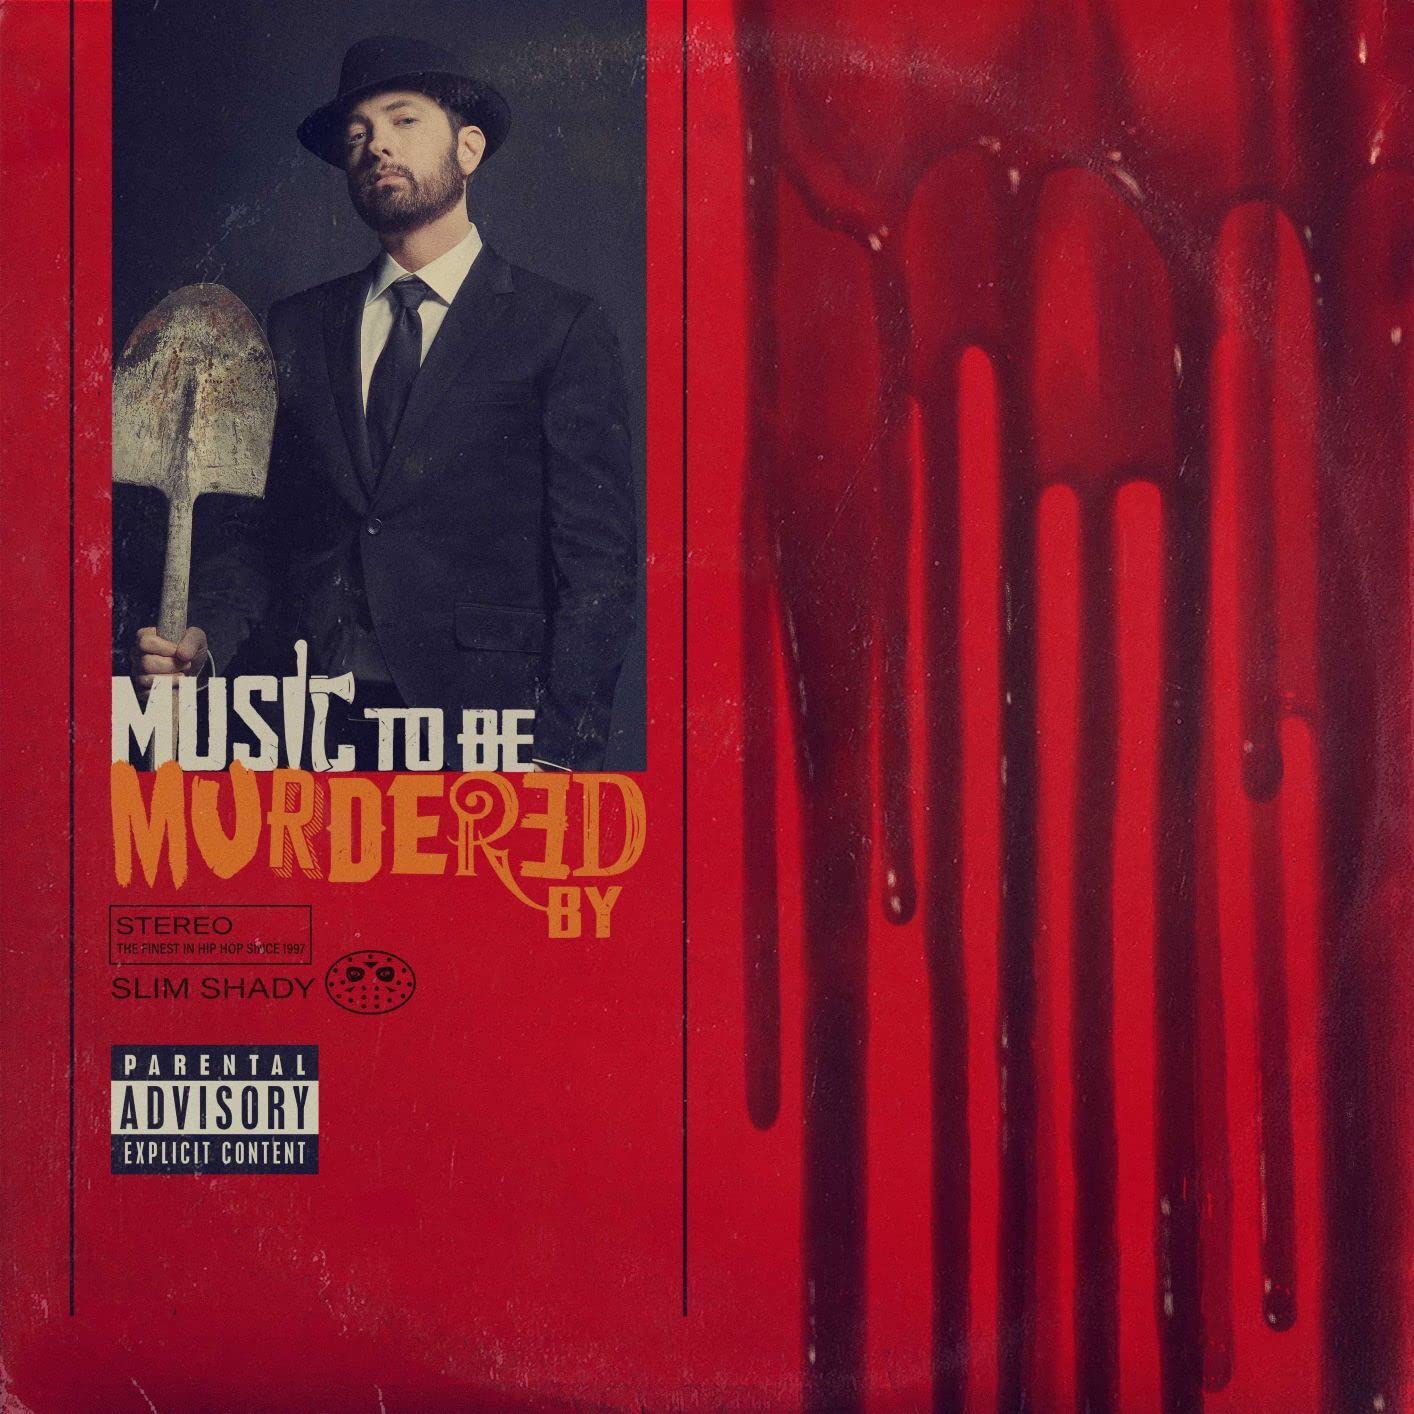 Music To Be Murdered By (2LP Vinyl) on MovieShack